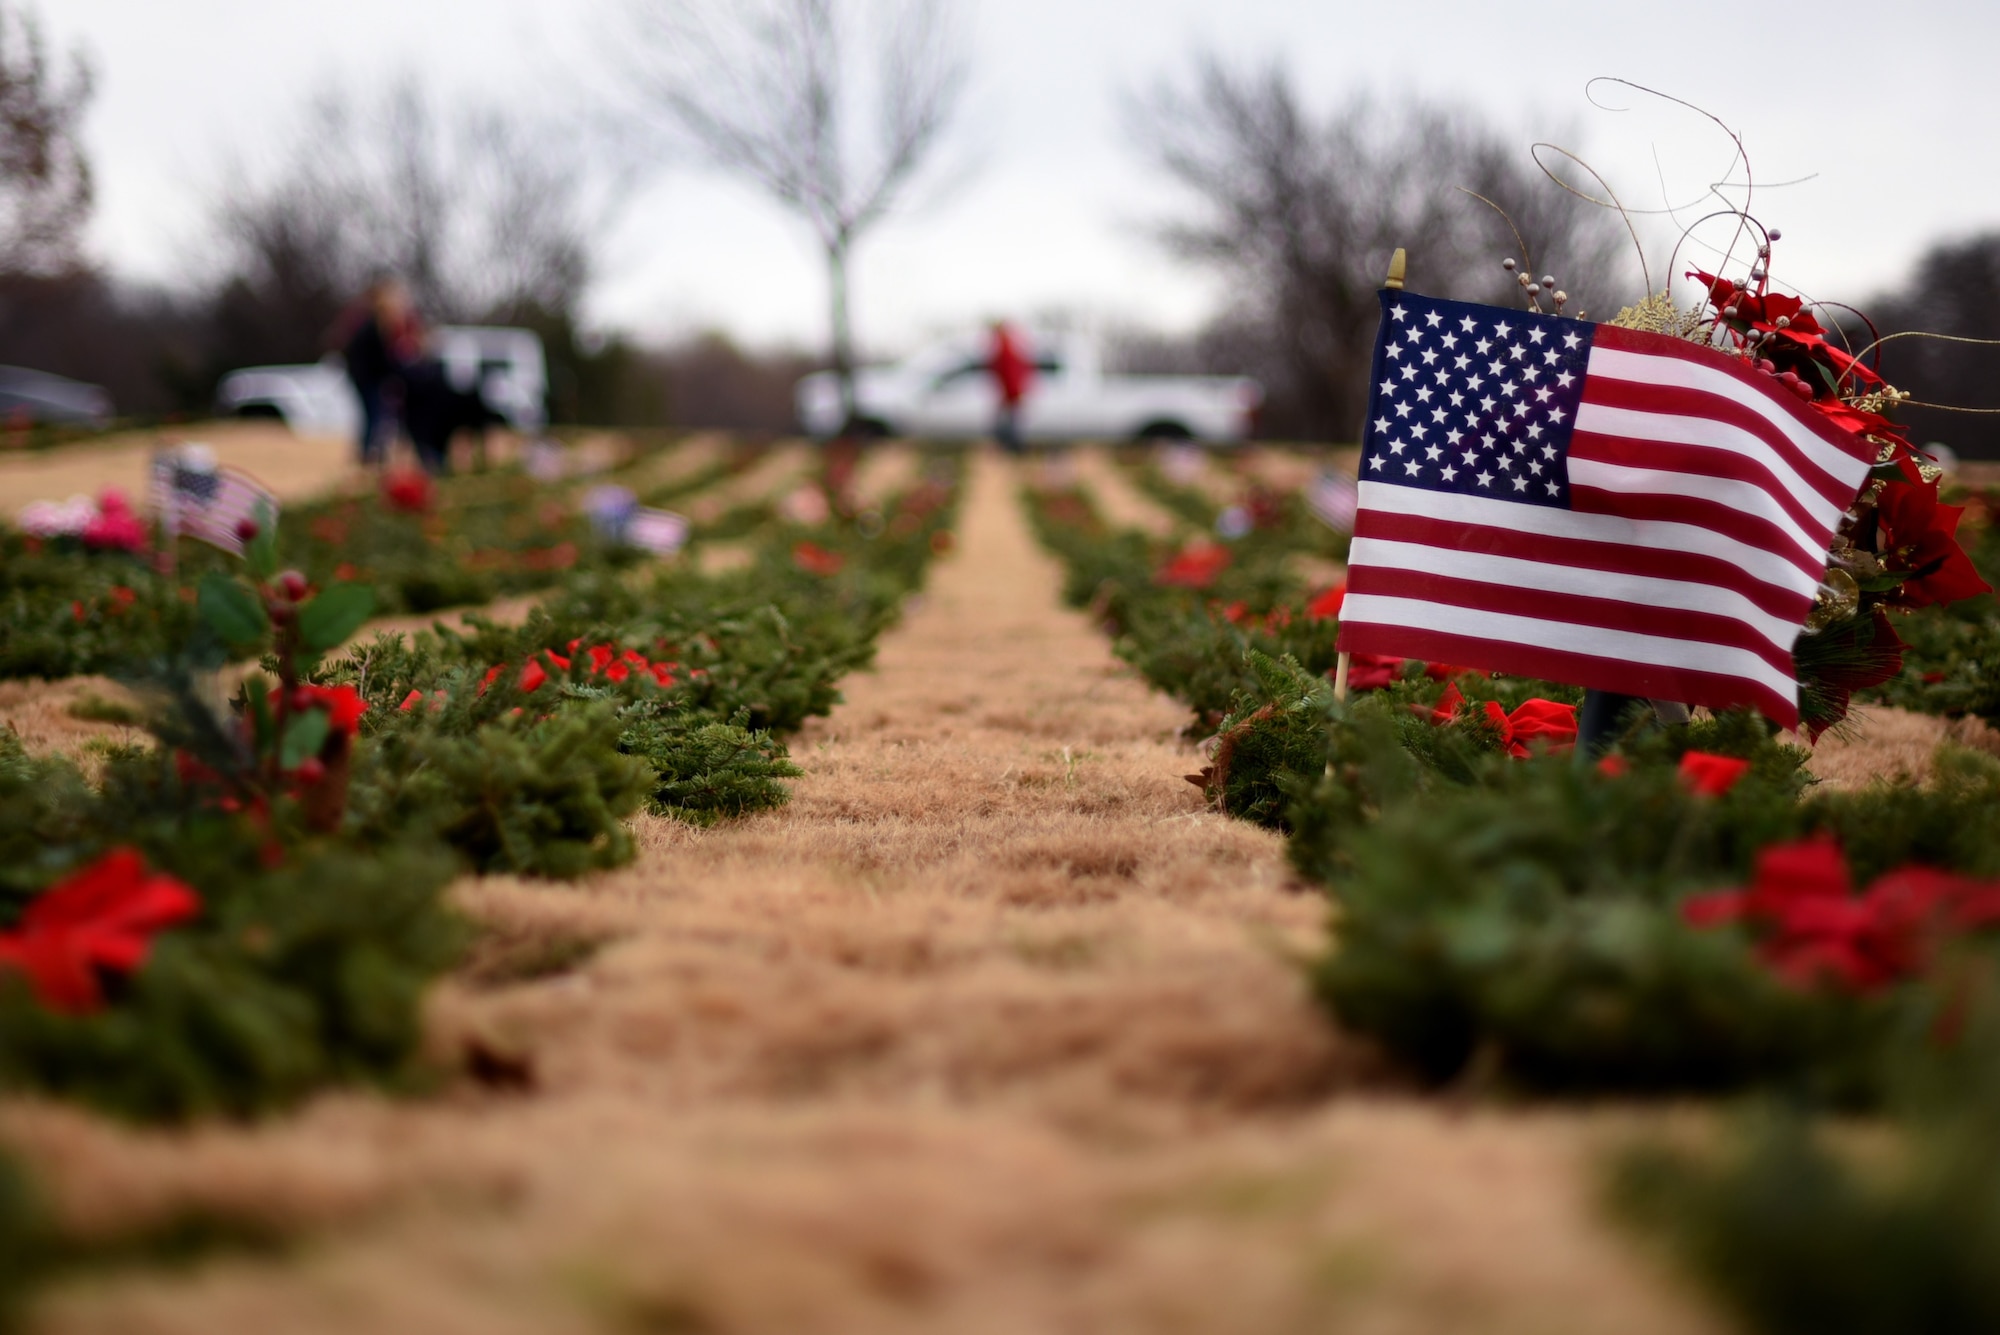 Wreaths lay near graves during a Wreaths Across America event at the Dallas-Fort Worth National Cemetery on Dec. 18, 2021. The Dallas-Fort Worth National Cemetery is the final resting place for 48,500 veterans. (U.S. Air Force photo by Staff Sgt. Randall Moose)